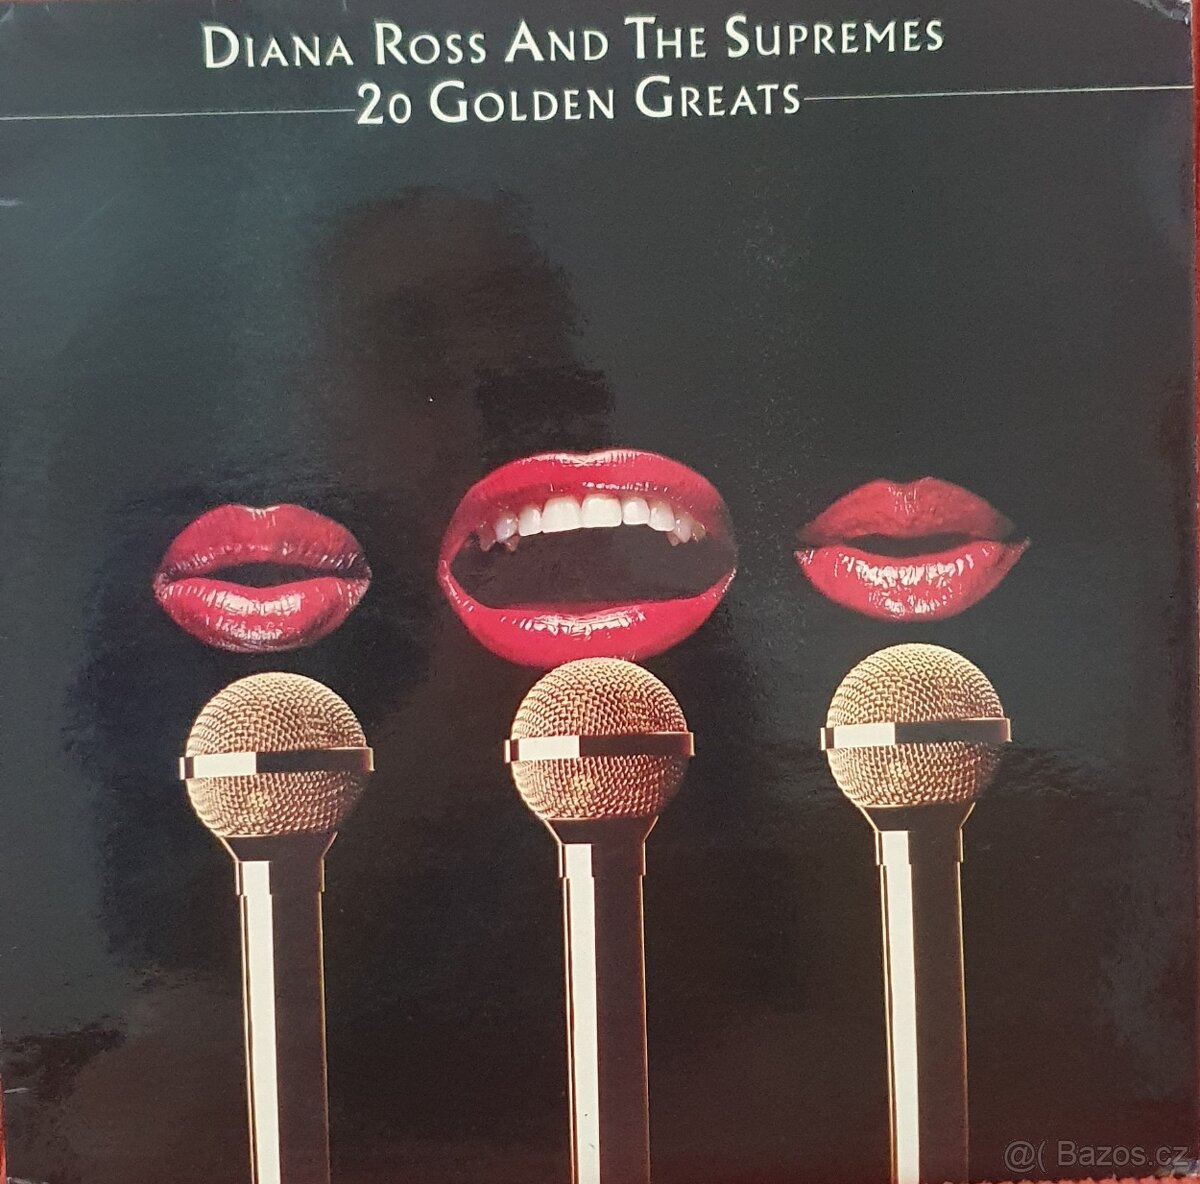 DIANA ROSS and THE SUPREMES 20 Golden Greats